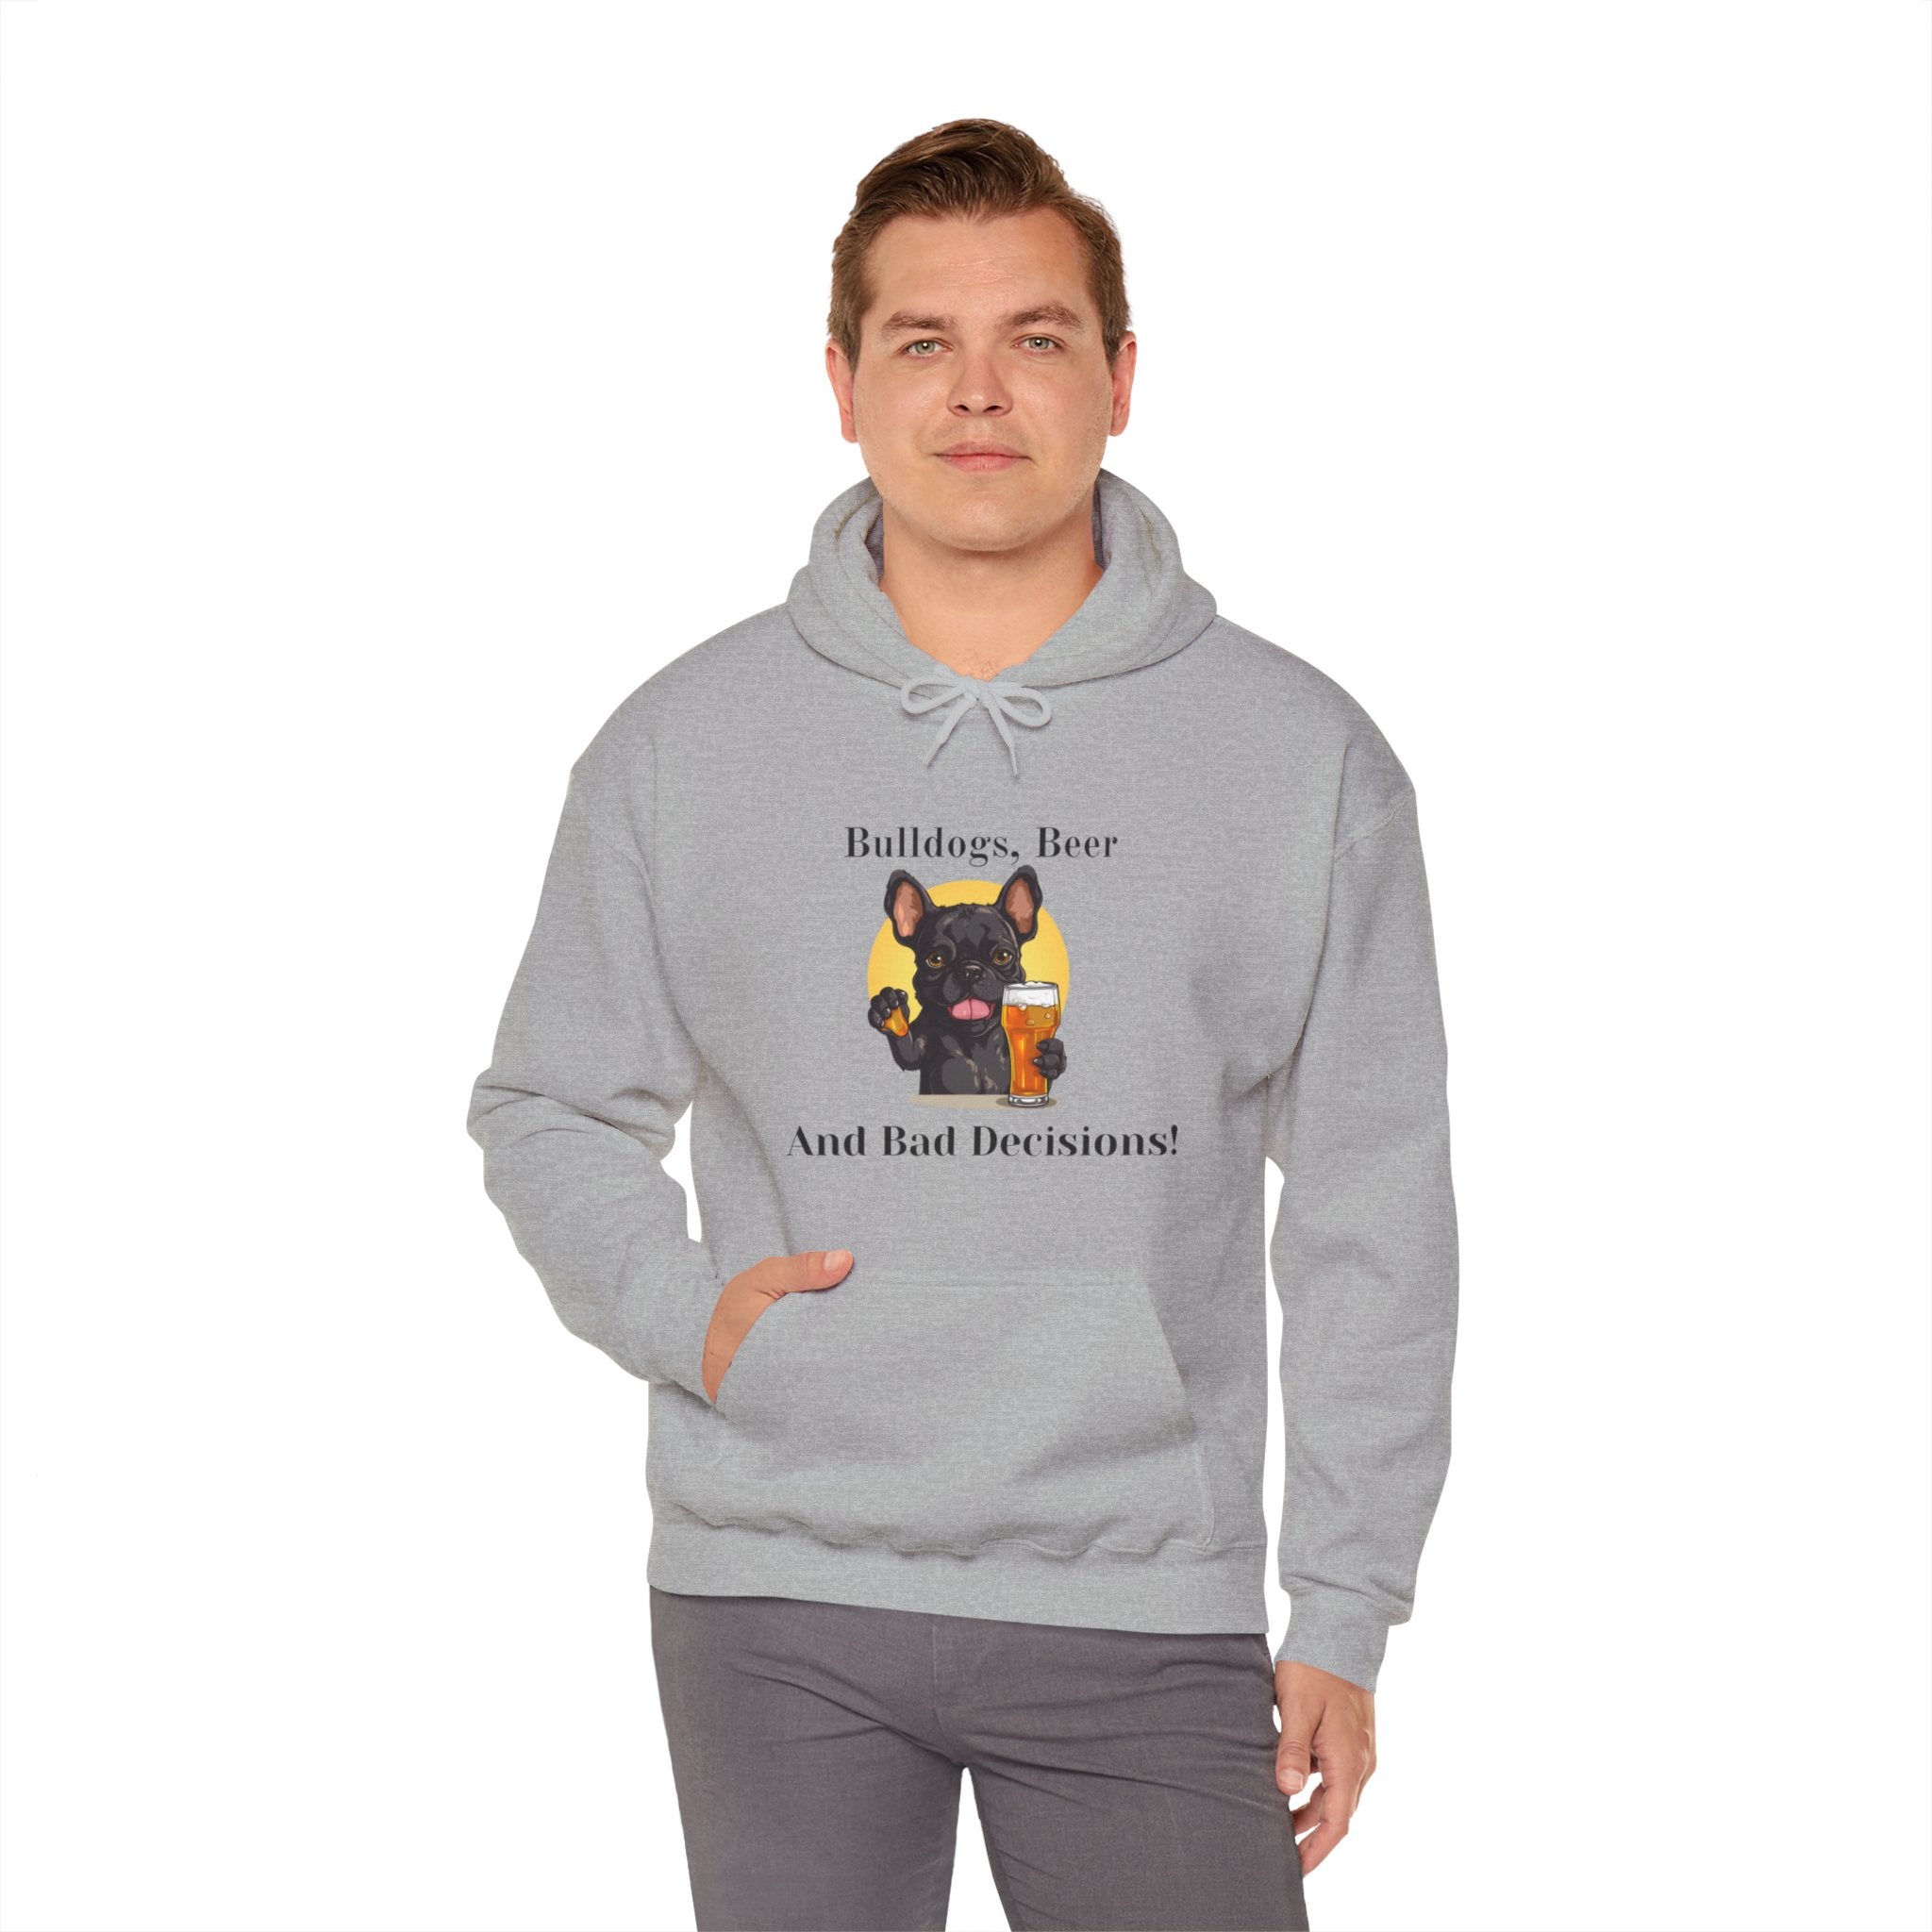 Bulldogs, Beer, and Bad Decisions" Hoodie - Your Go-To Gear for Mischievous Times! (French/Black)